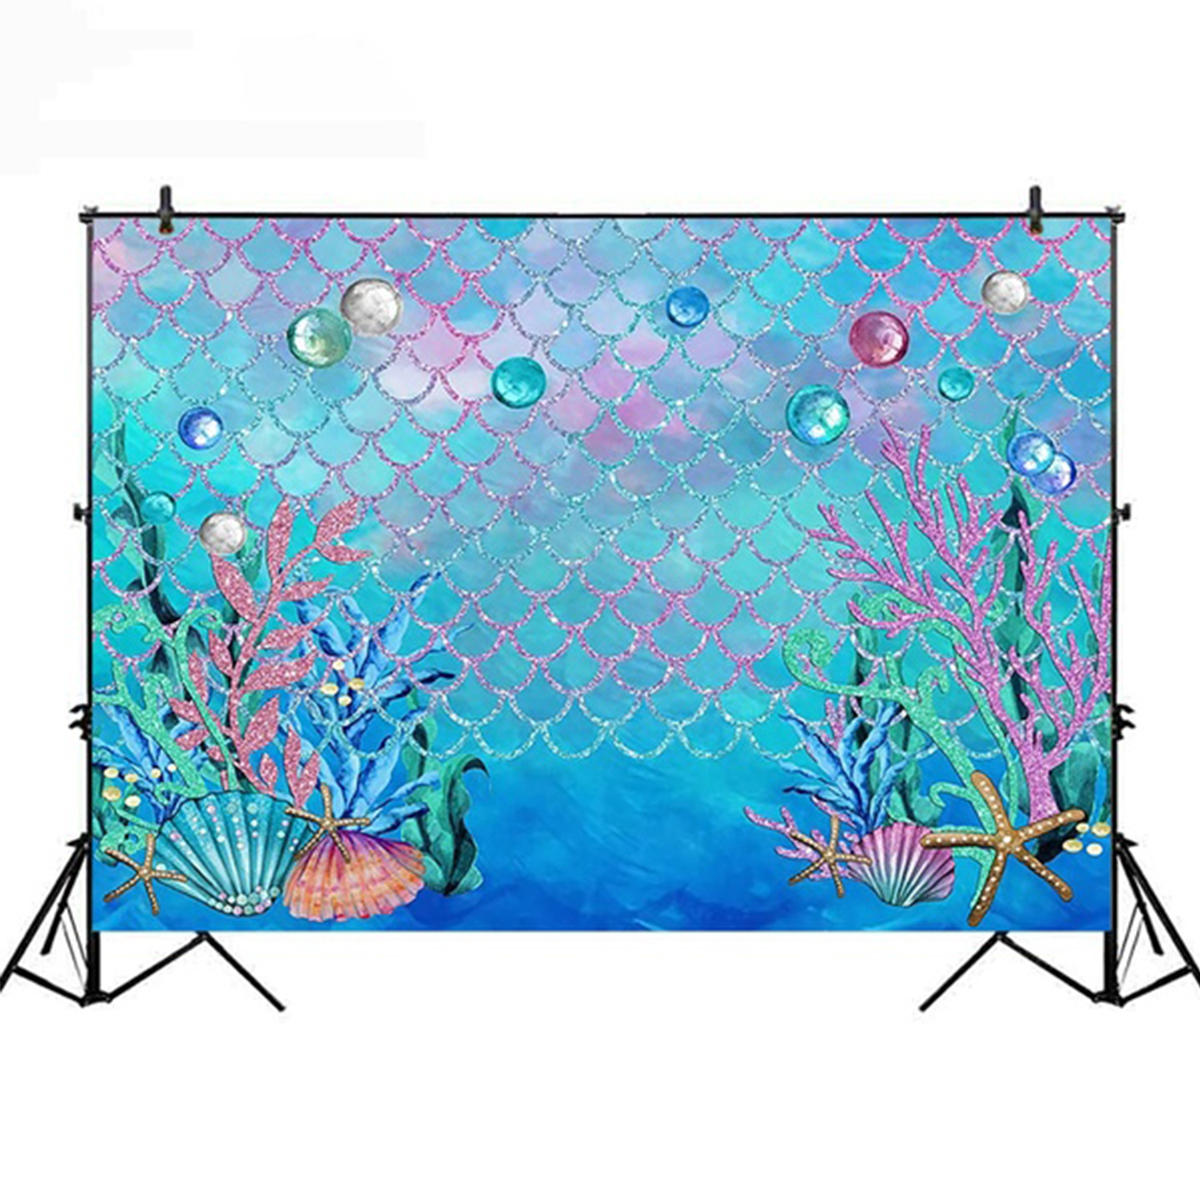 5x3FT 7x5FT 9x6FT Marine Coral Photography Backdrop Background Studio Prop - 0.9x1.5m